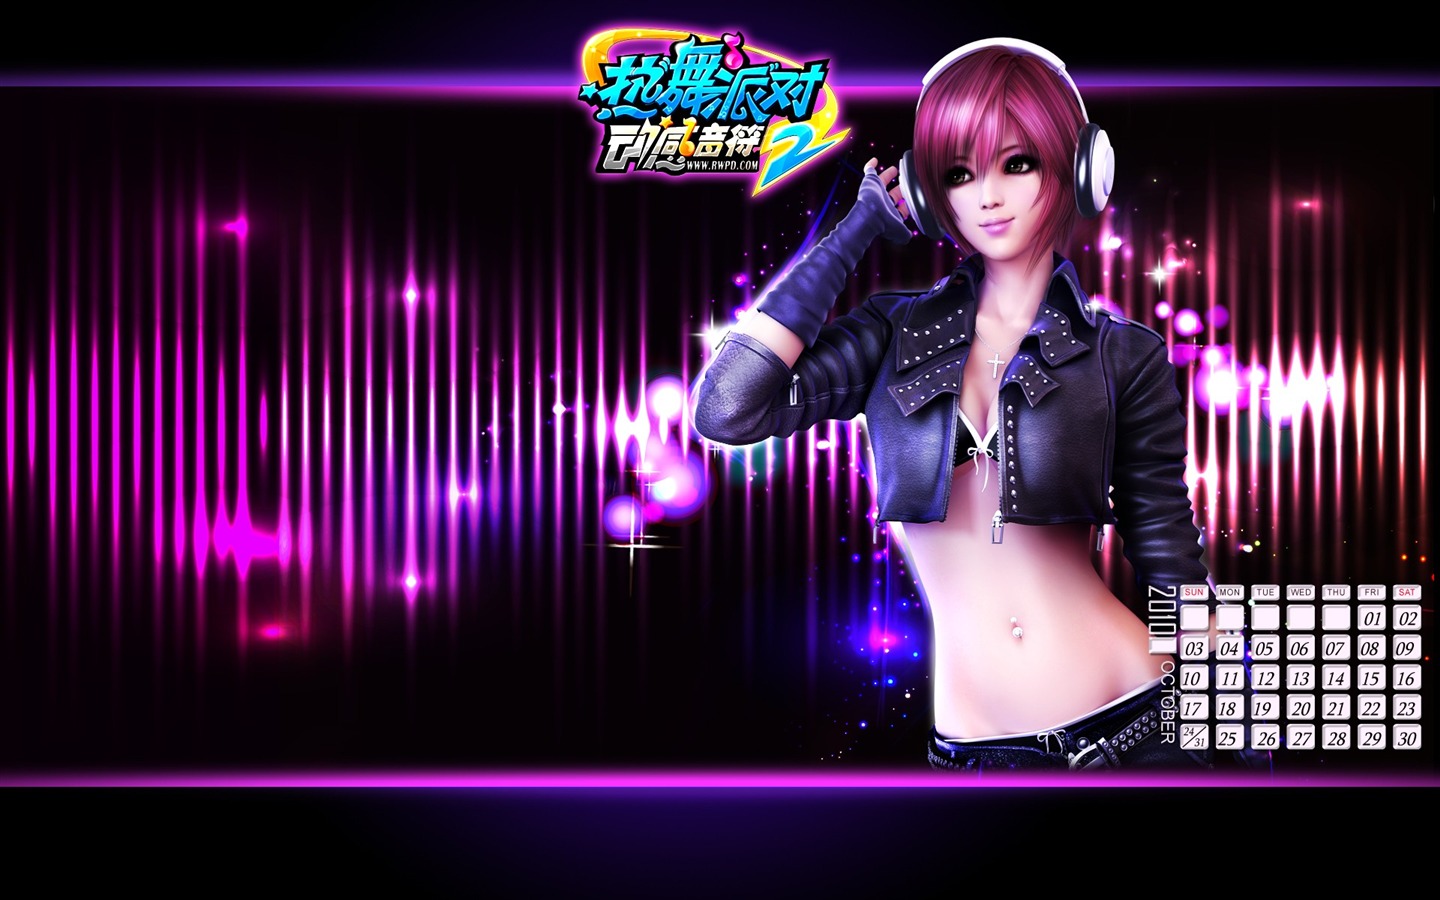 Online game Hot Dance Party II official wallpapers #34 - 1440x900